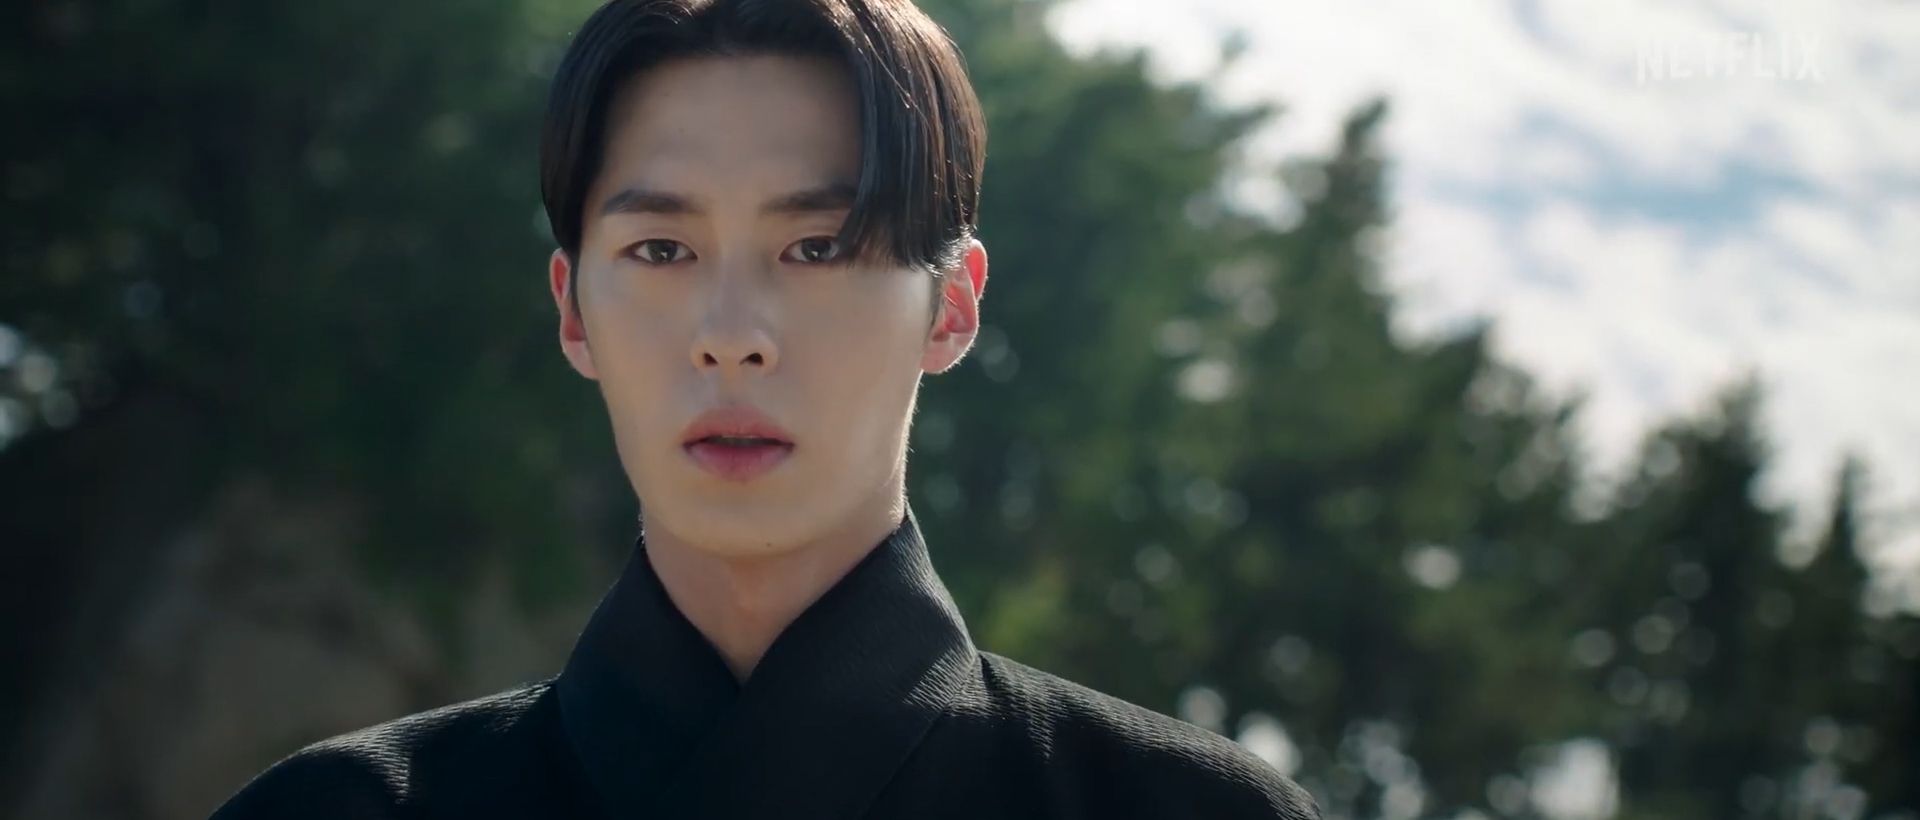 Alchemy of Souls Season 2 Episode 10 Recap and Review: Jin Bu-yeon Brings  The Perfect Ending For All | Leisurebyte